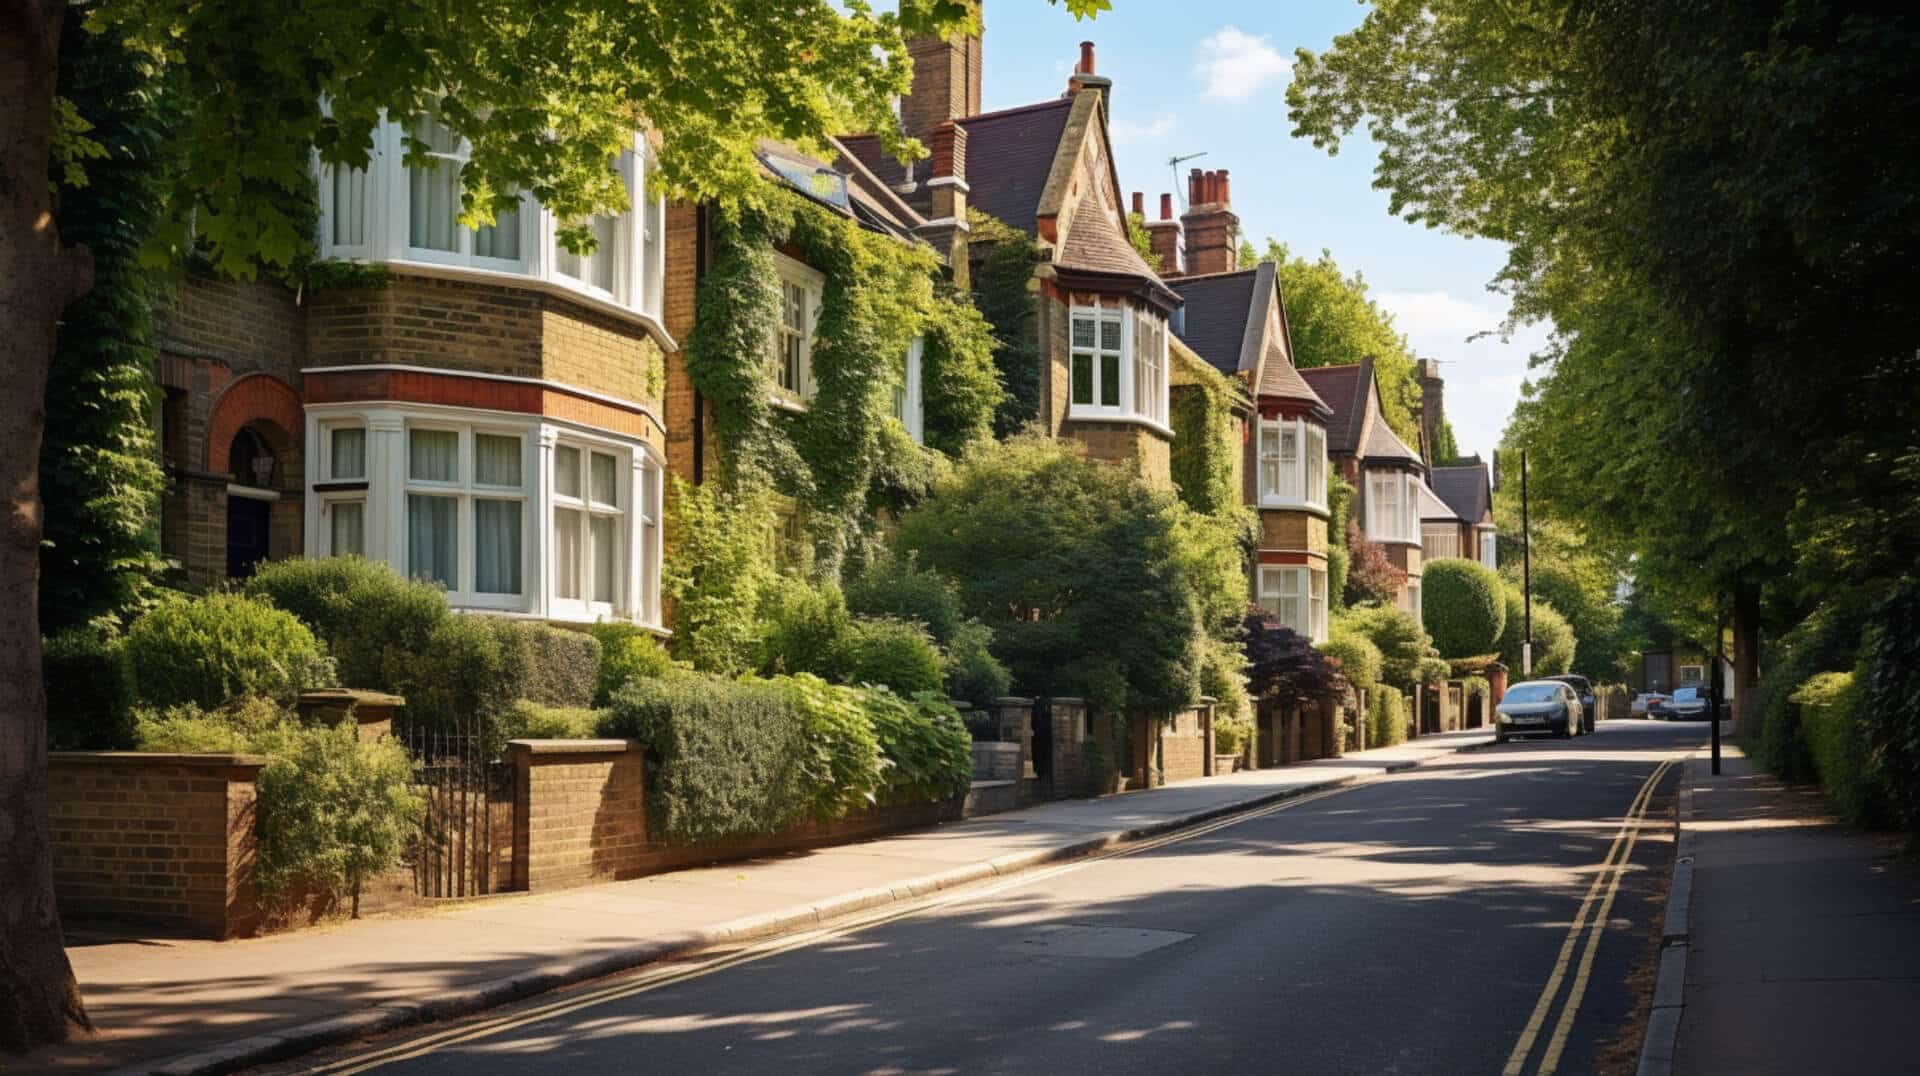 Top 10 Tips for Discreet Property Sales in Putney